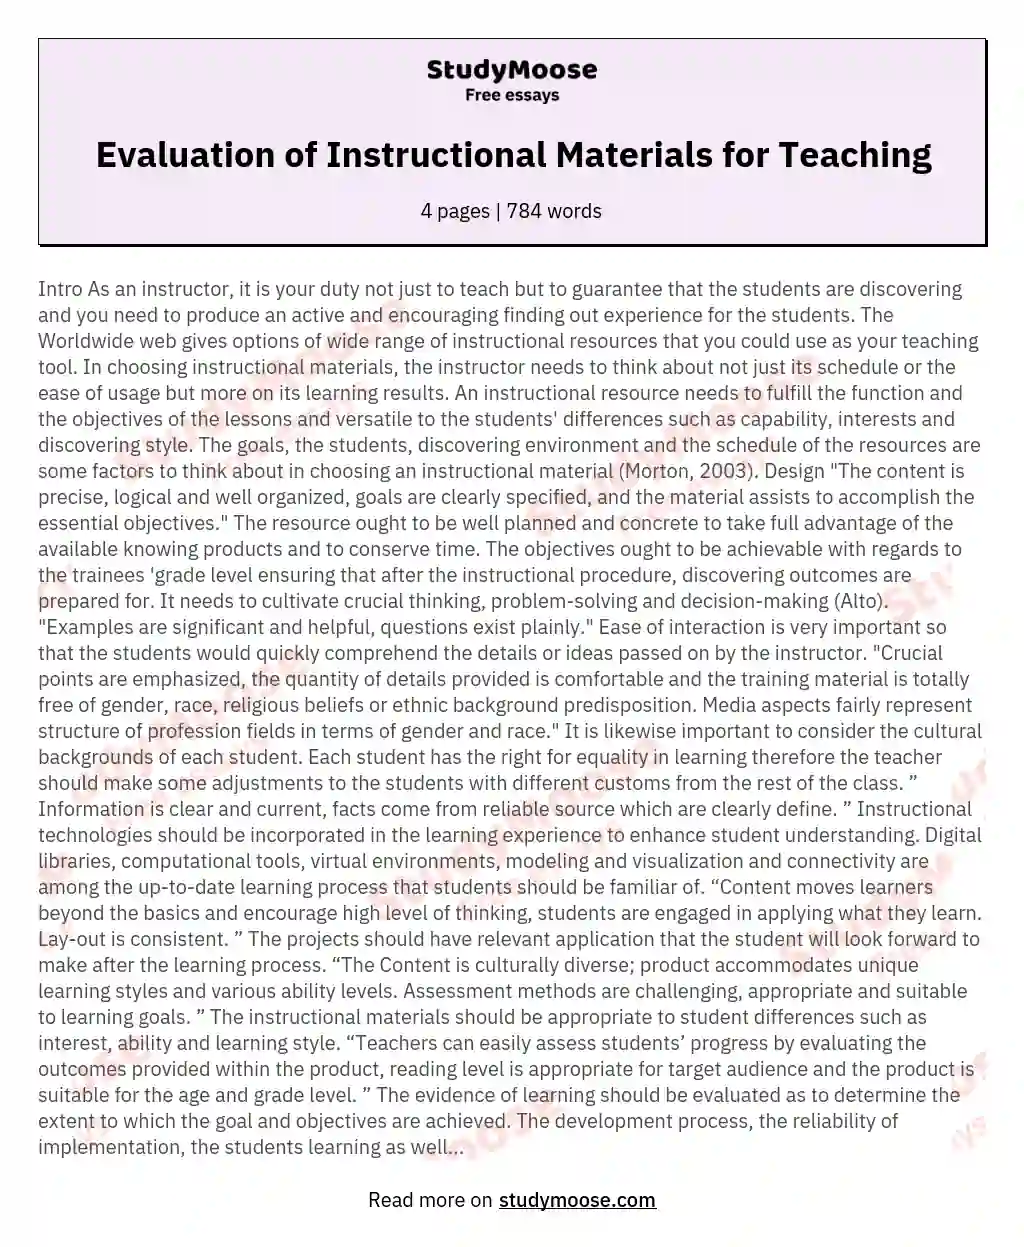 Evaluation of Instructional Materials for Teaching essay